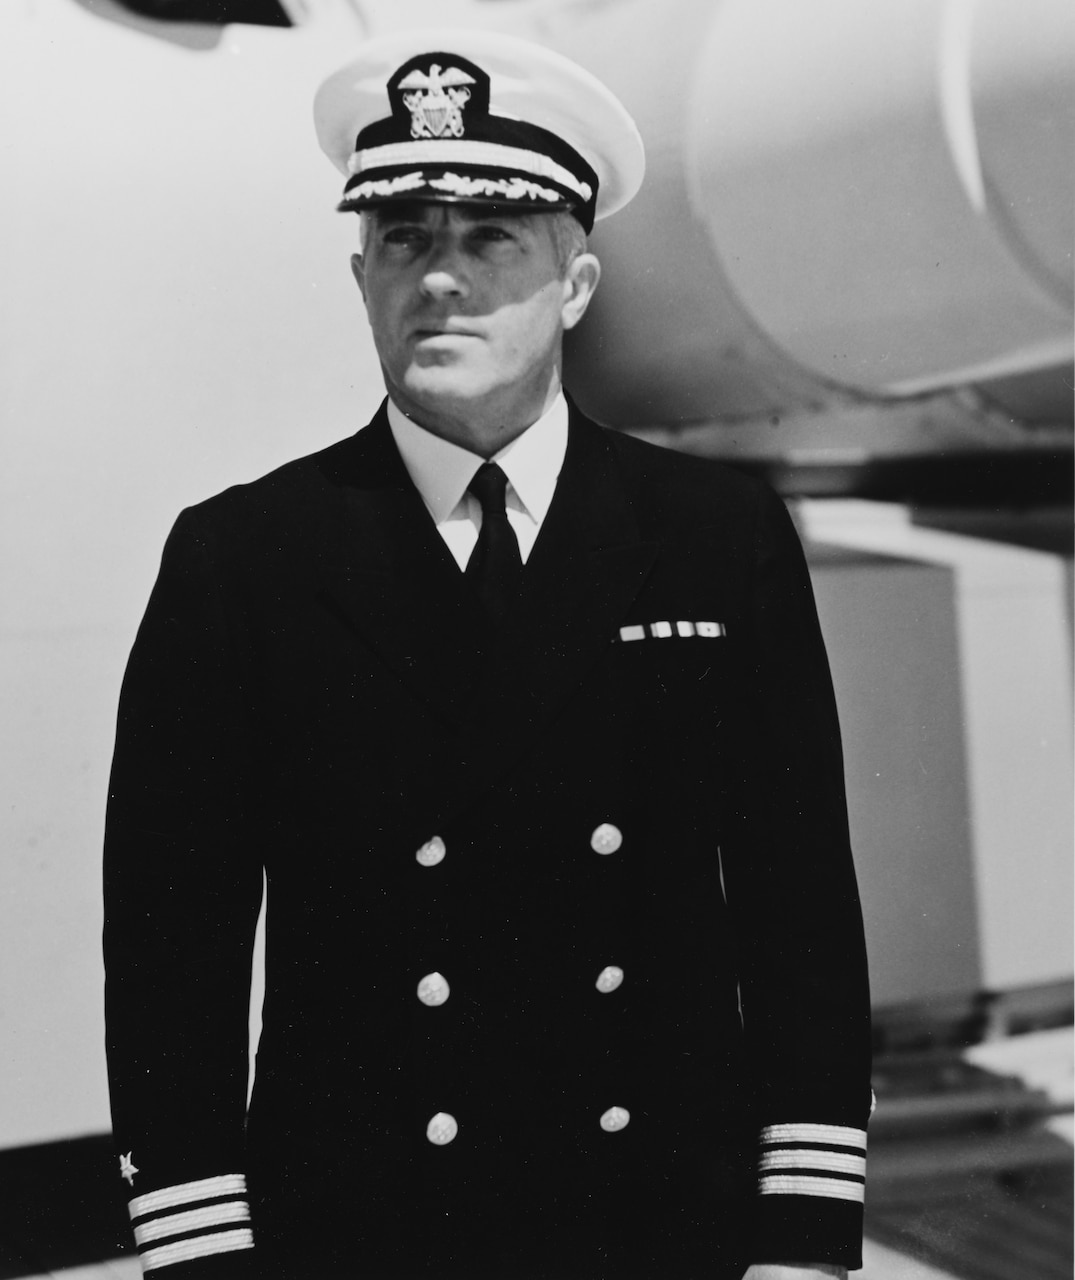 A man in dress uniform and cap looks into the distance.